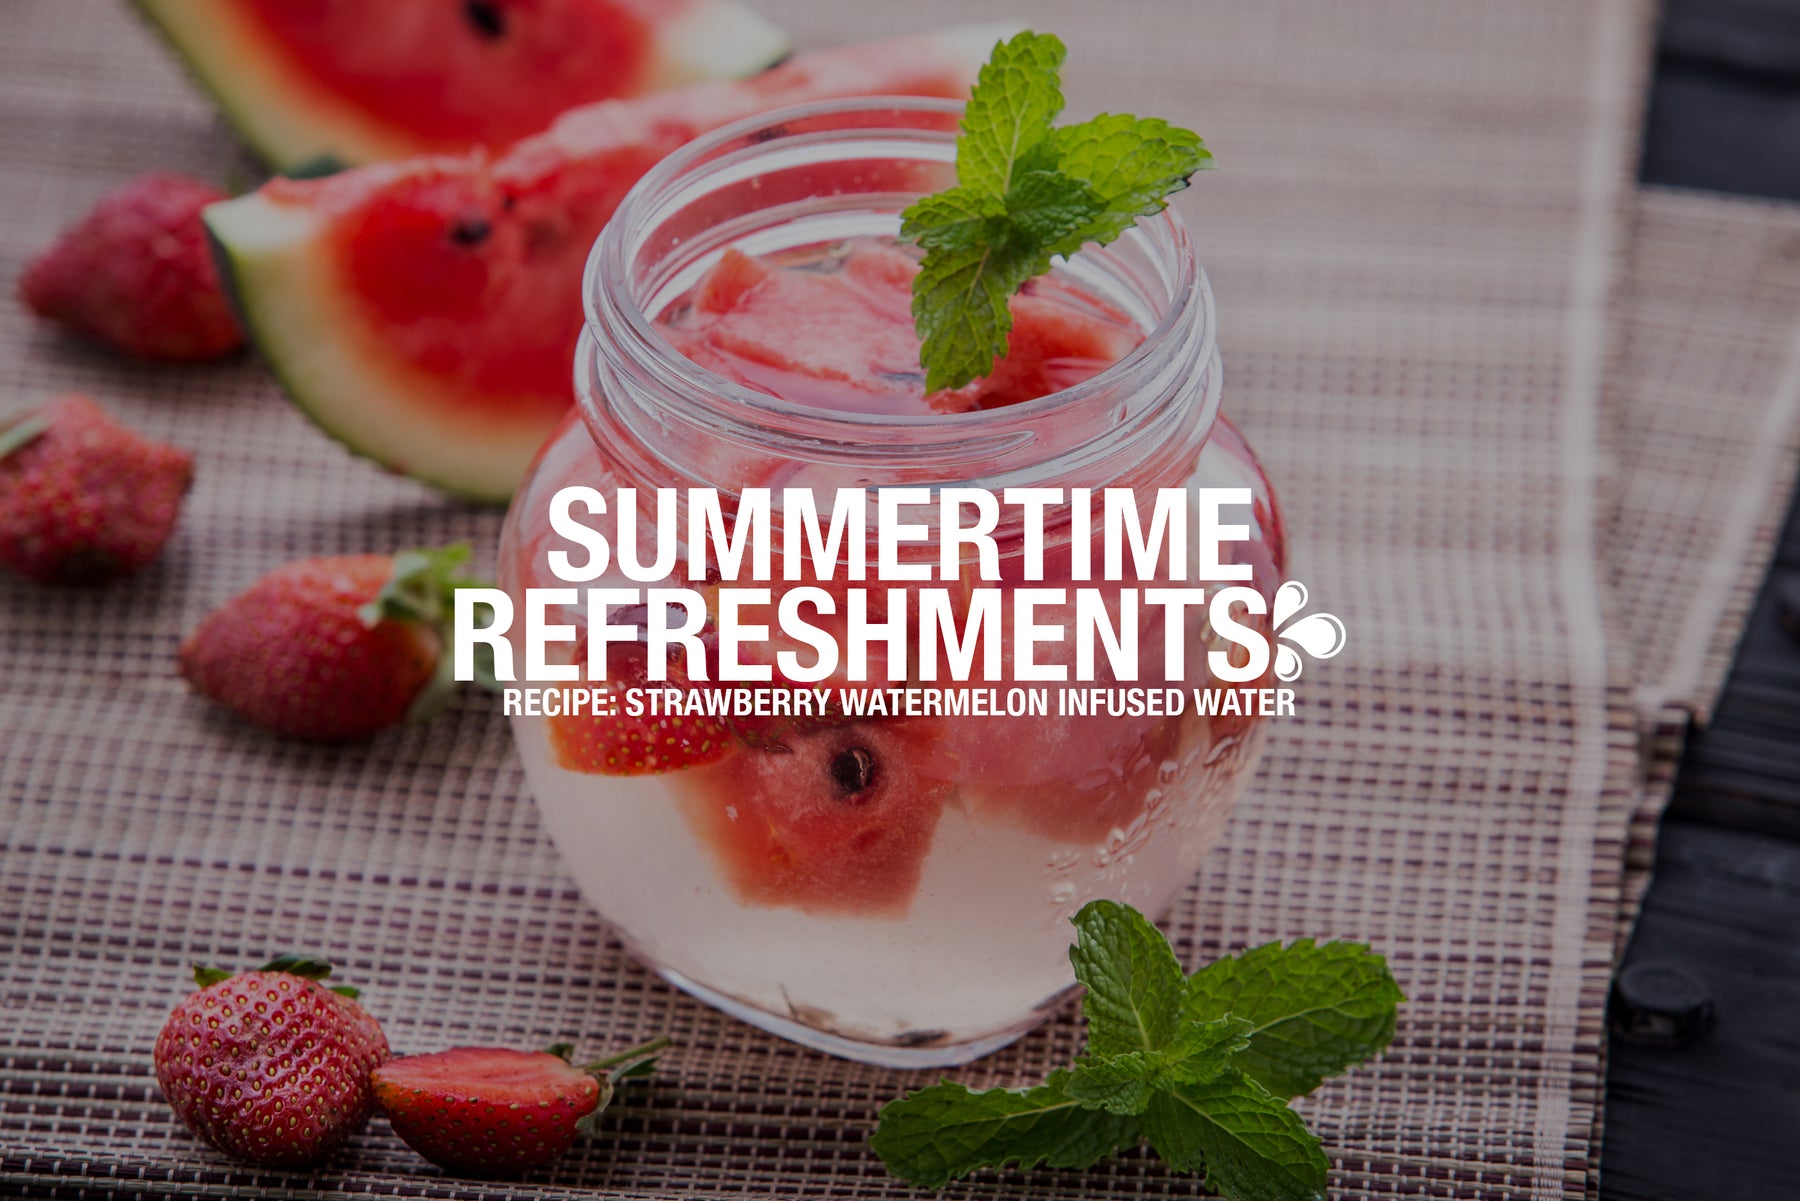 Summertime Refreshments: Strawberry Watermelon Infused Water